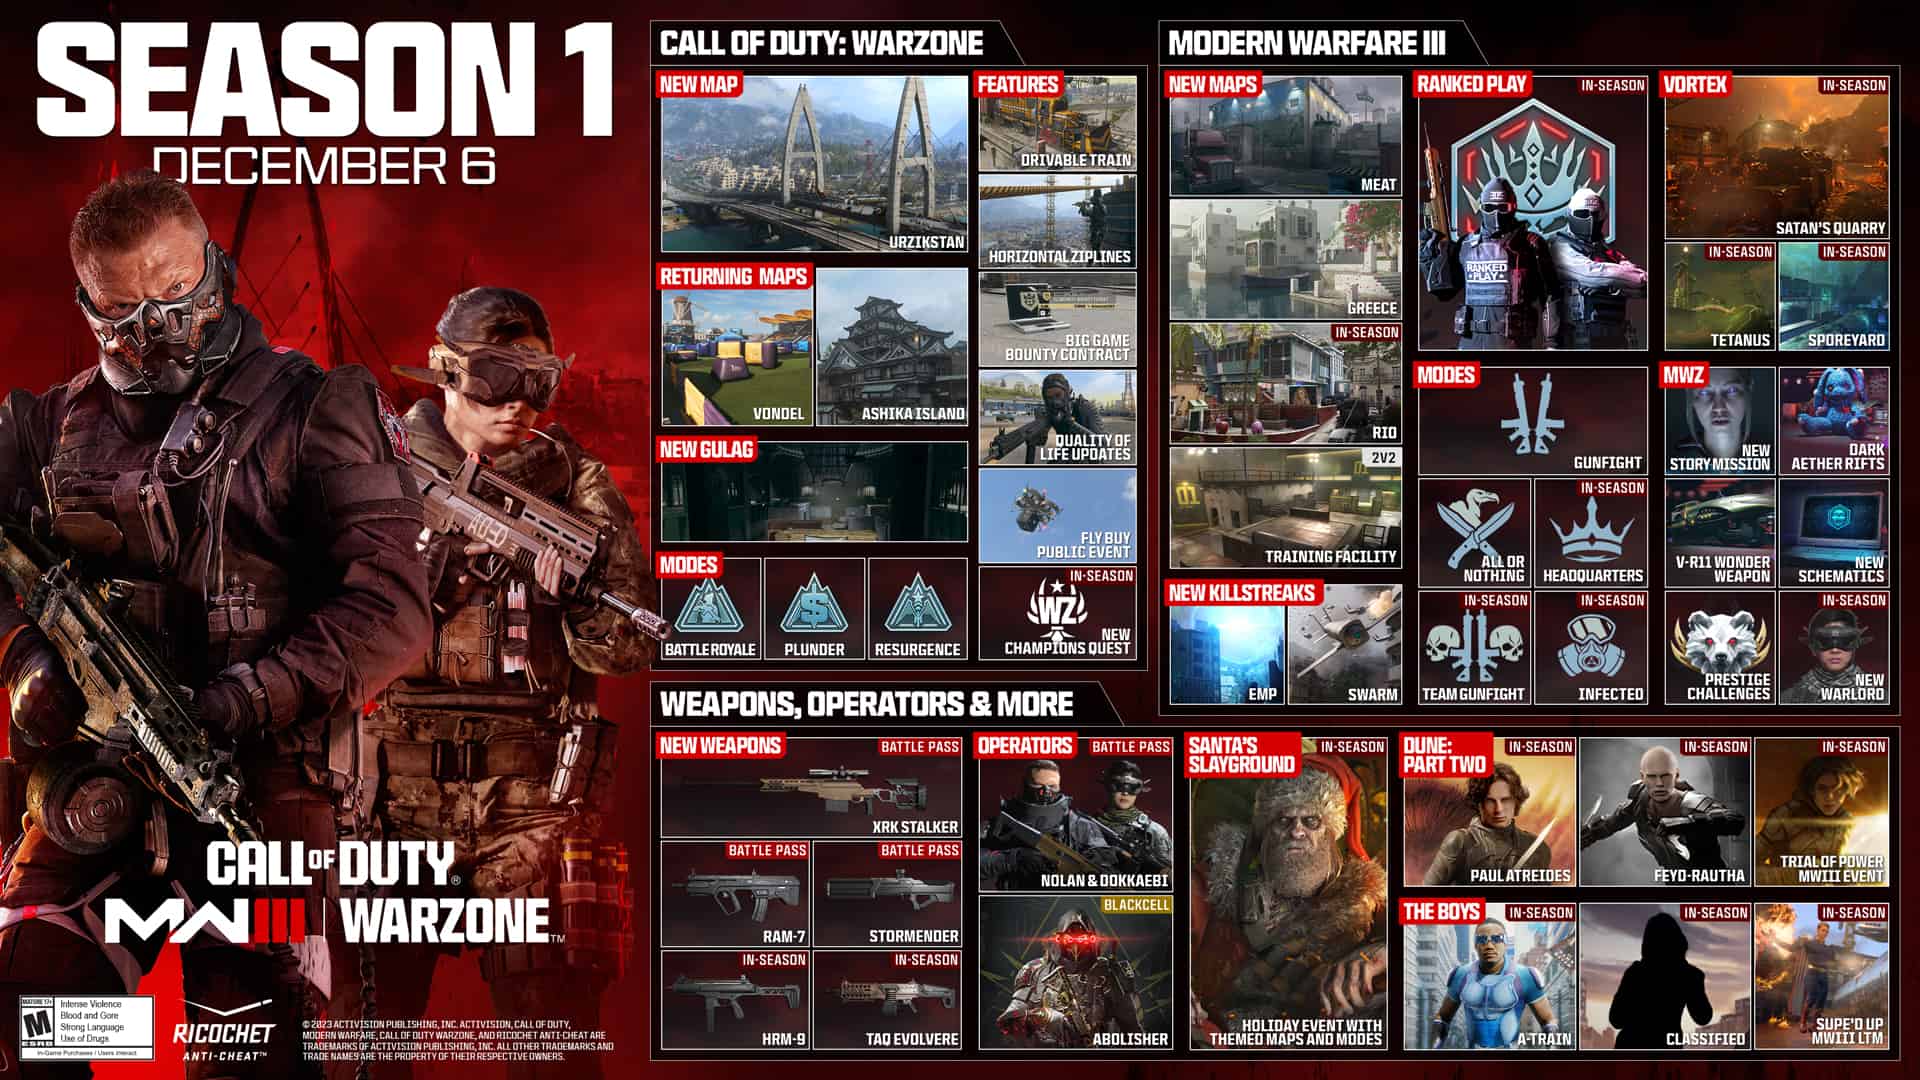 Read up on all the new content coming to MW3 Season 1. Image via Actvision.